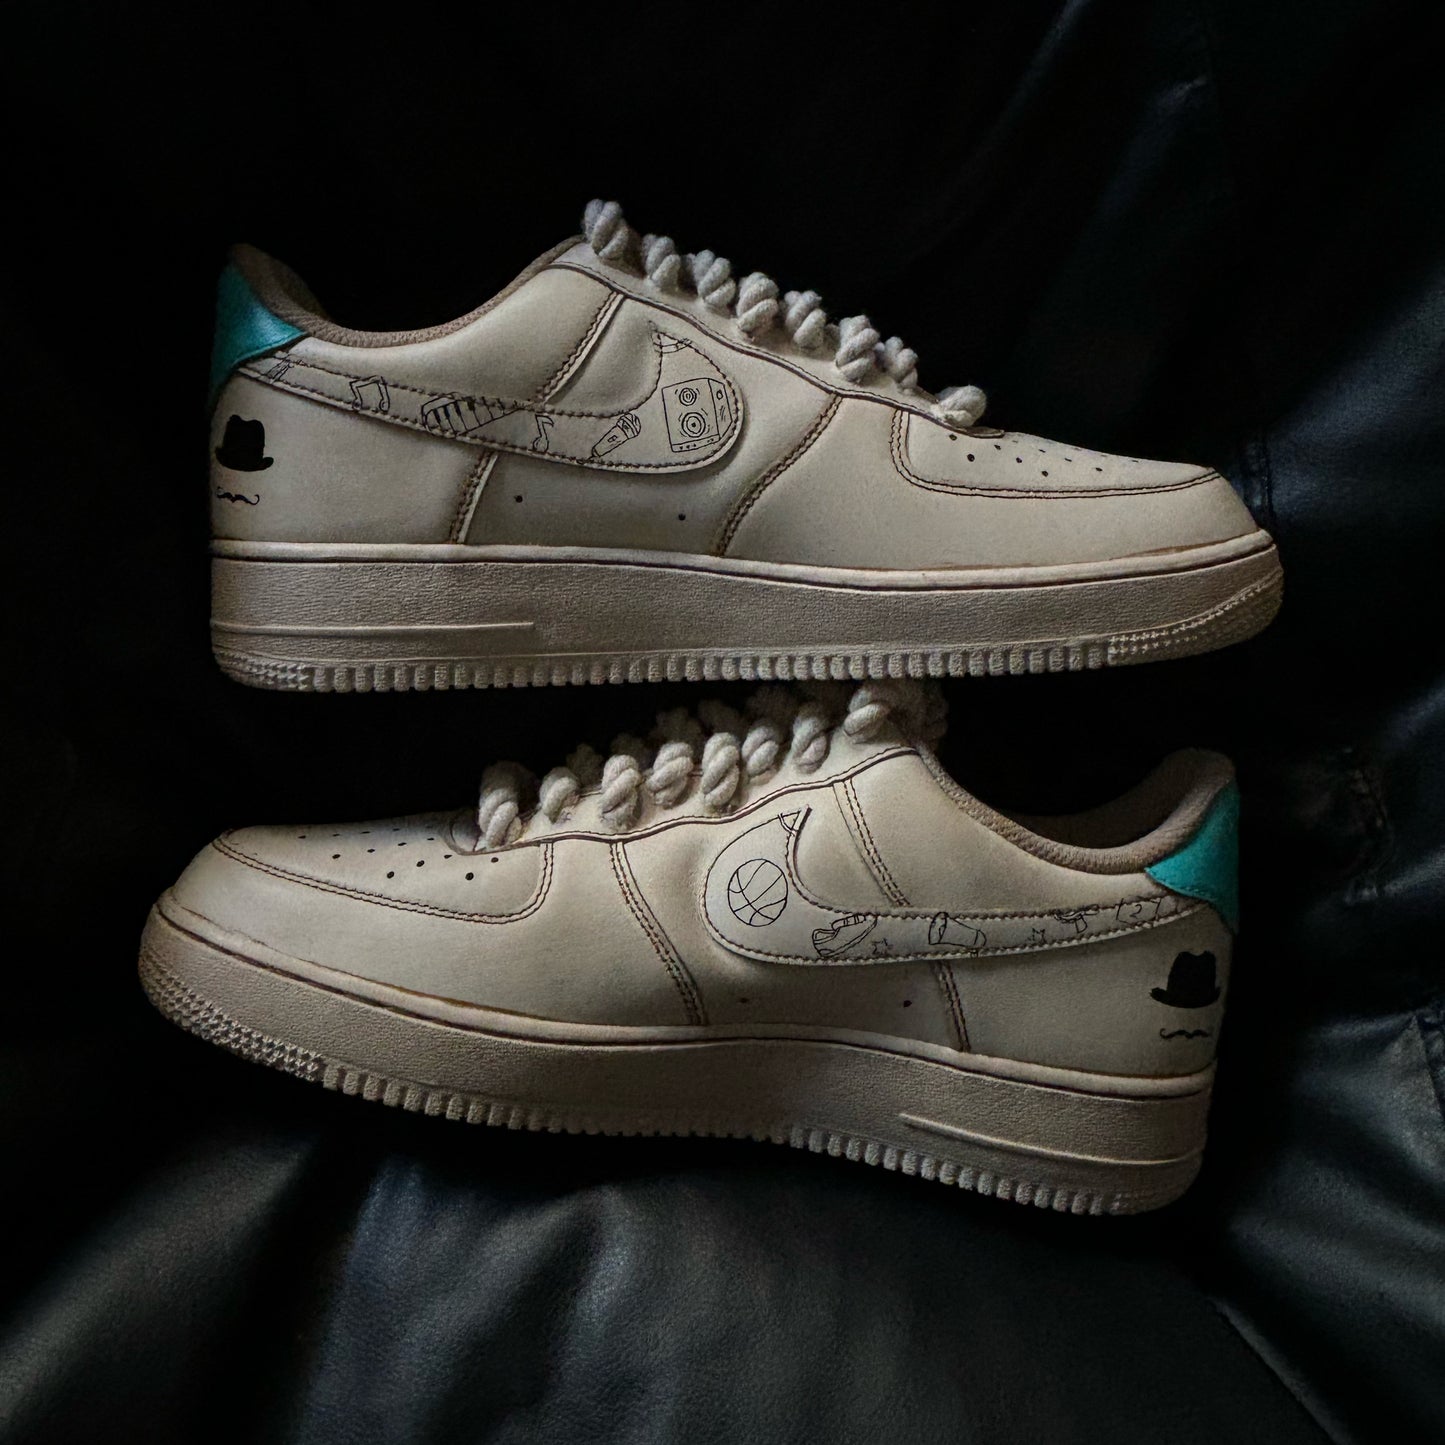 Nike Air Force 1 x The Creation of Adam Inspired